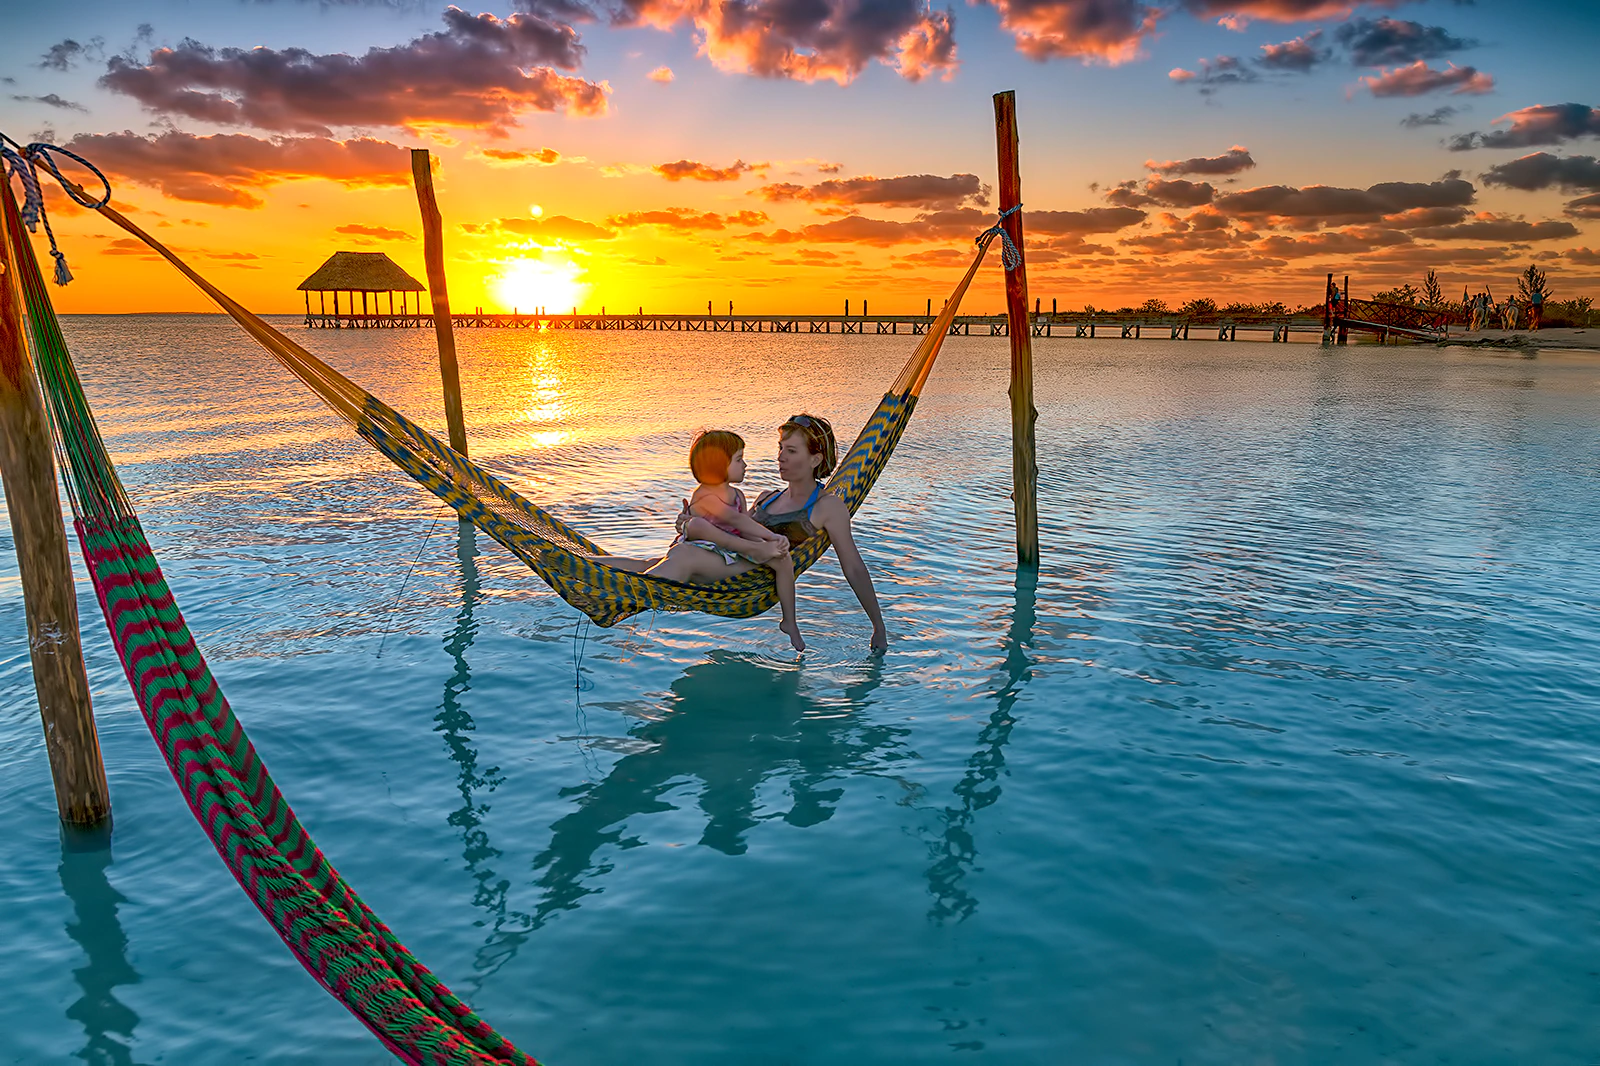 Things to do in Cancun: Your 3-Day Dream Trip in Cancun